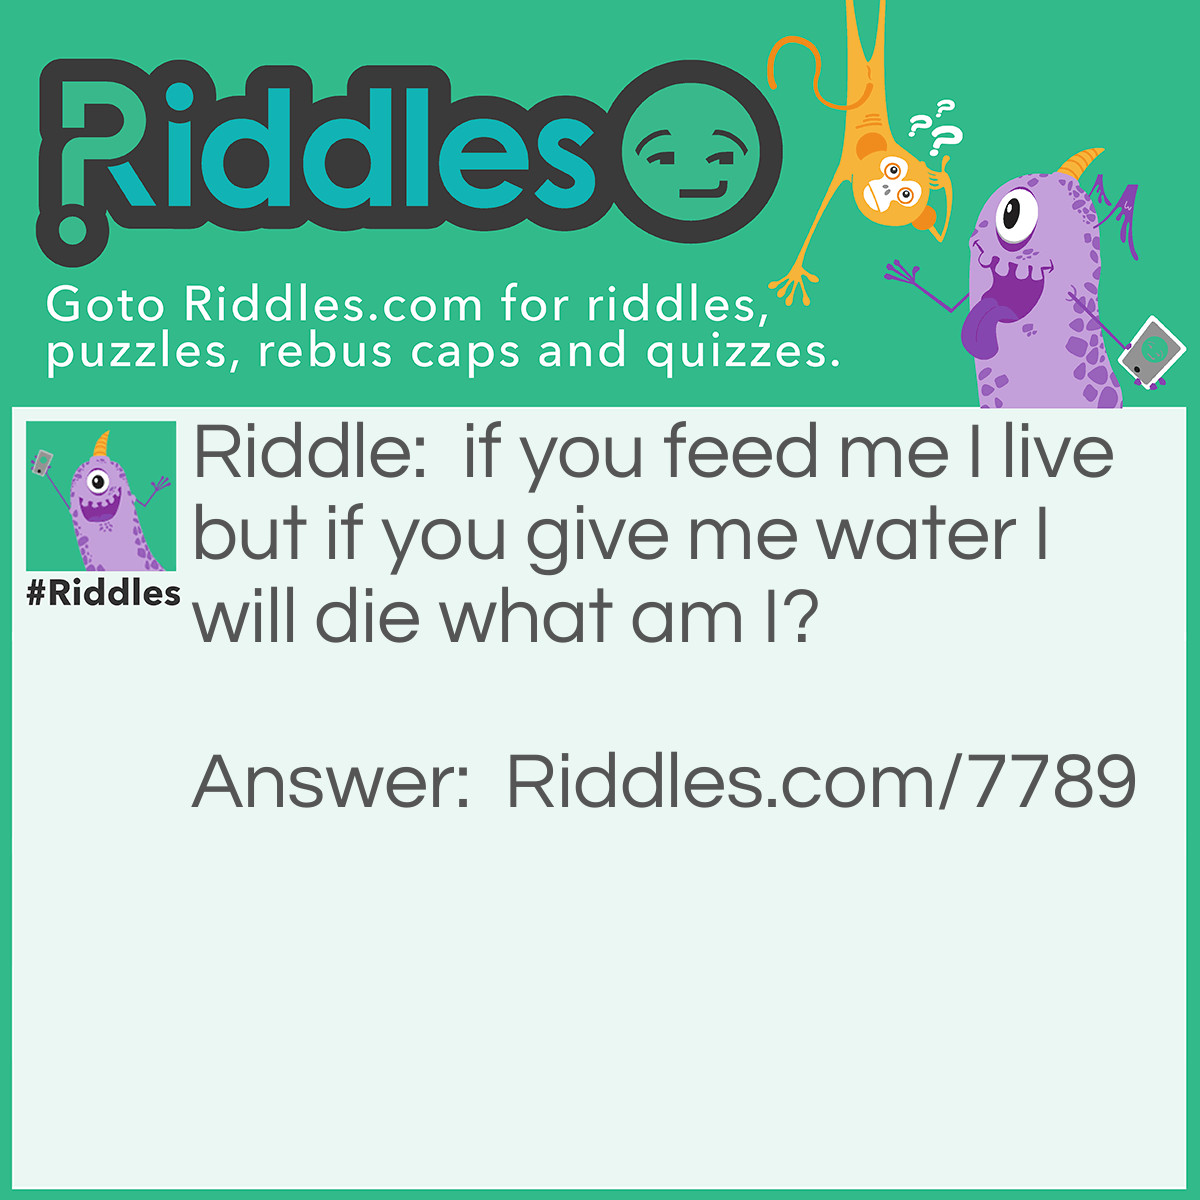 Riddle: if you feed me I live but if you give me water I will die what am I? Answer: FiRe